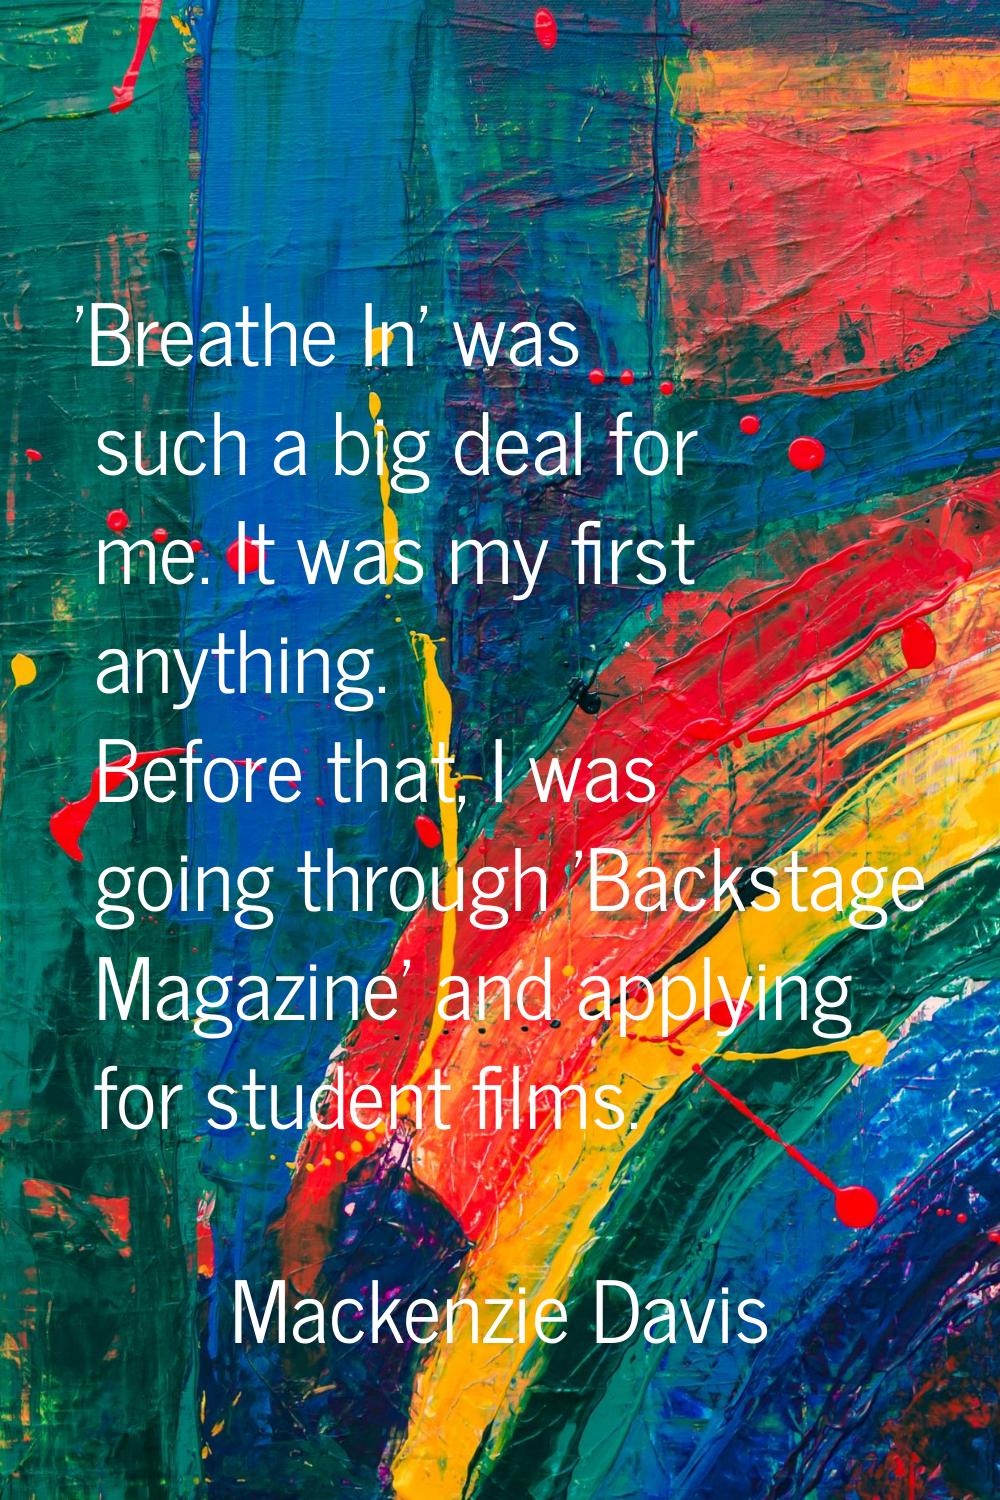 'Breathe In' was such a big deal for me. It was my first anything. Before that, I was going through